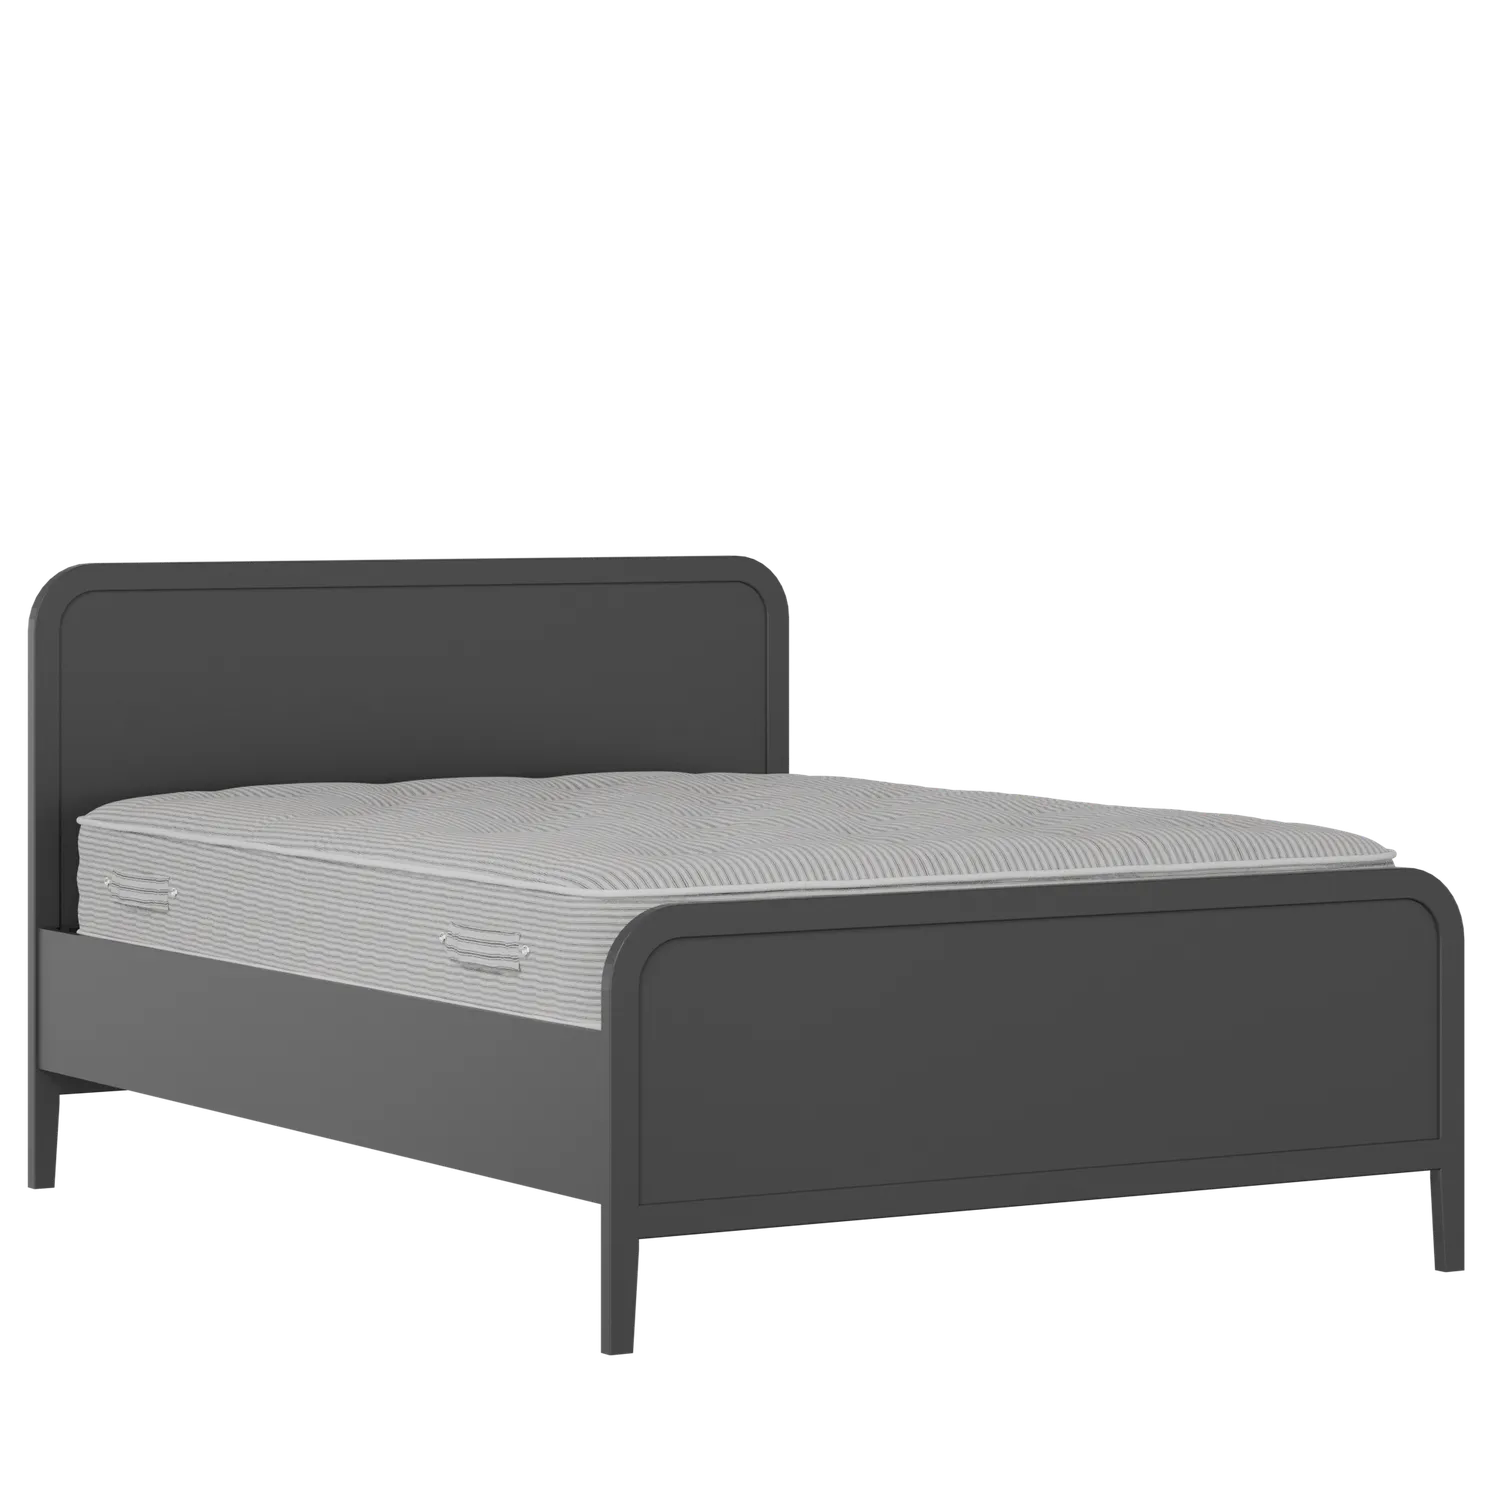 Keats Painted painted wood bed in black with Juno mattress